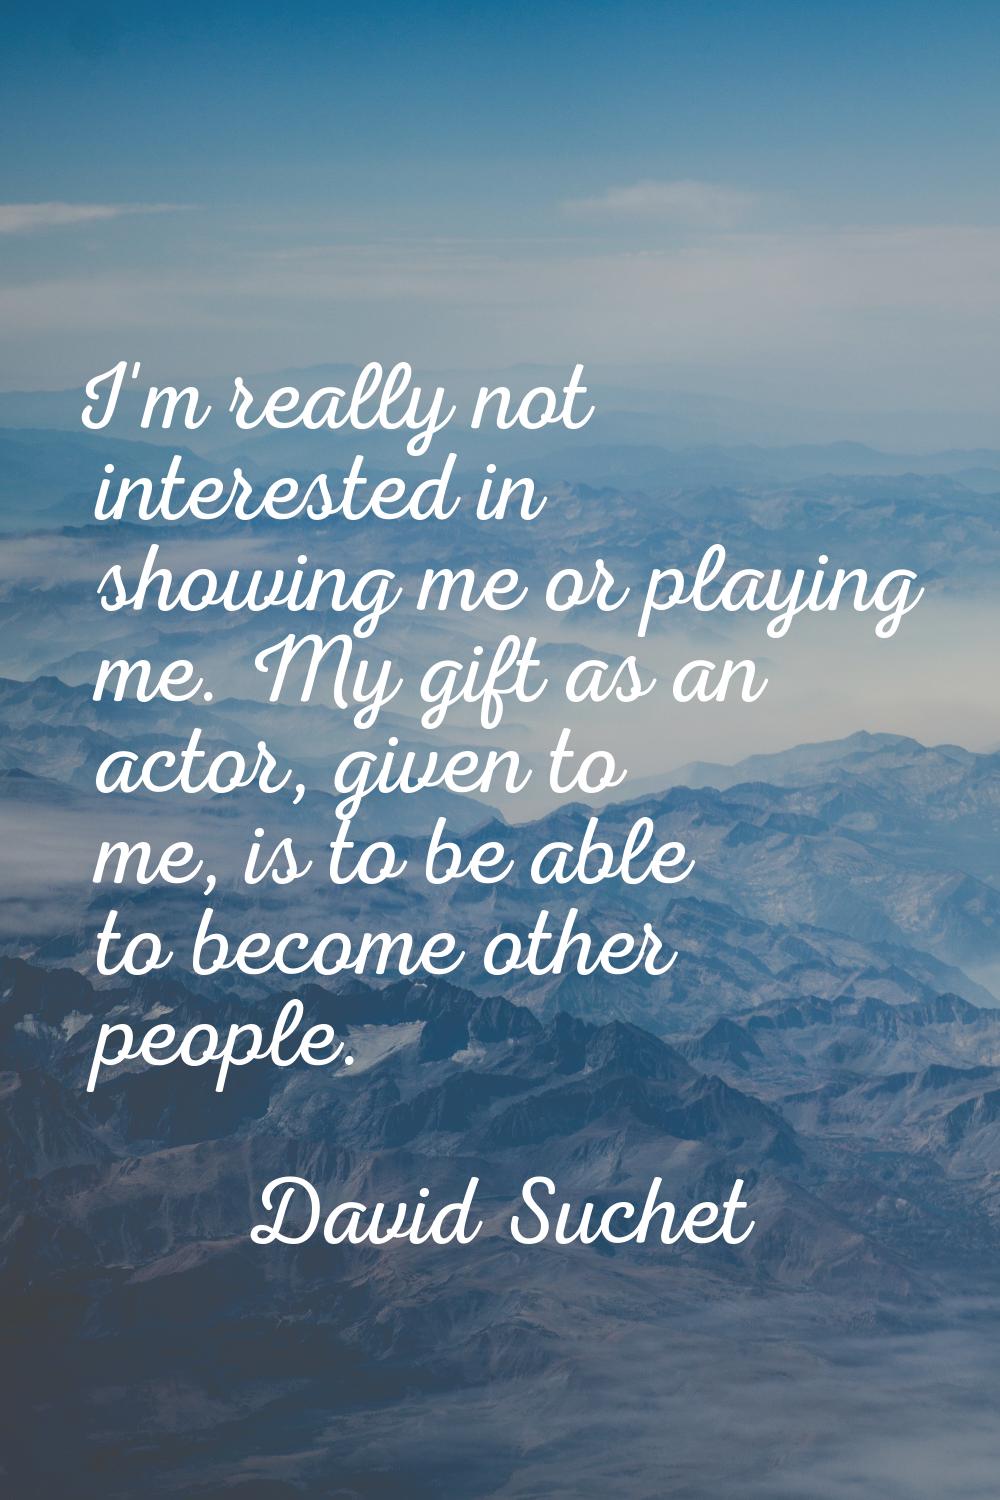 I'm really not interested in showing me or playing me. My gift as an actor, given to me, is to be a